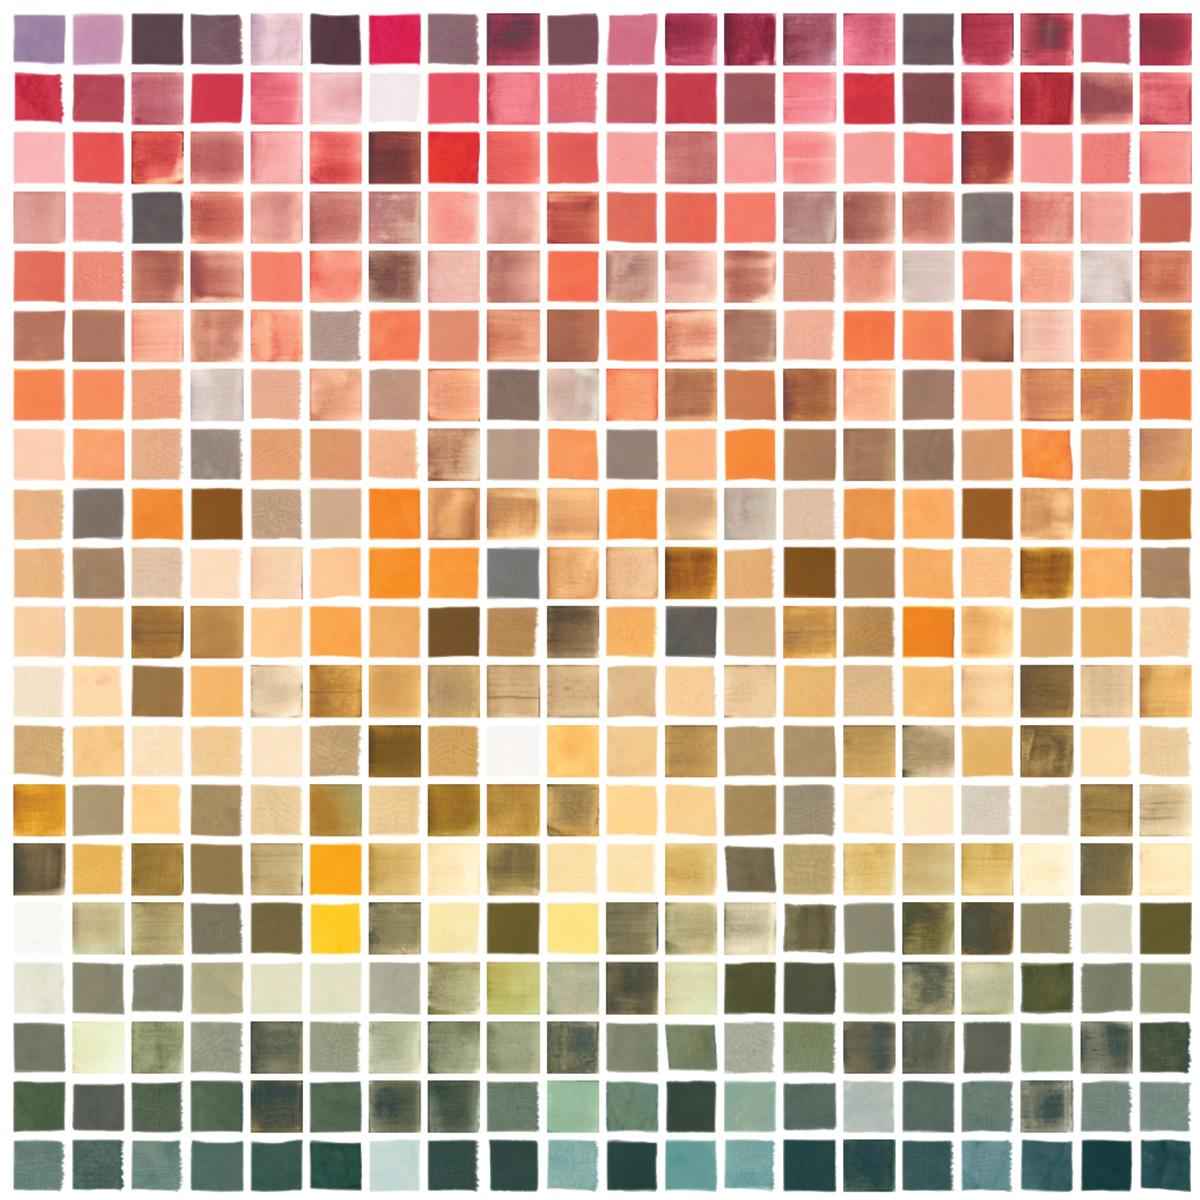 Color swatches from the Mushroom Color Atlas.